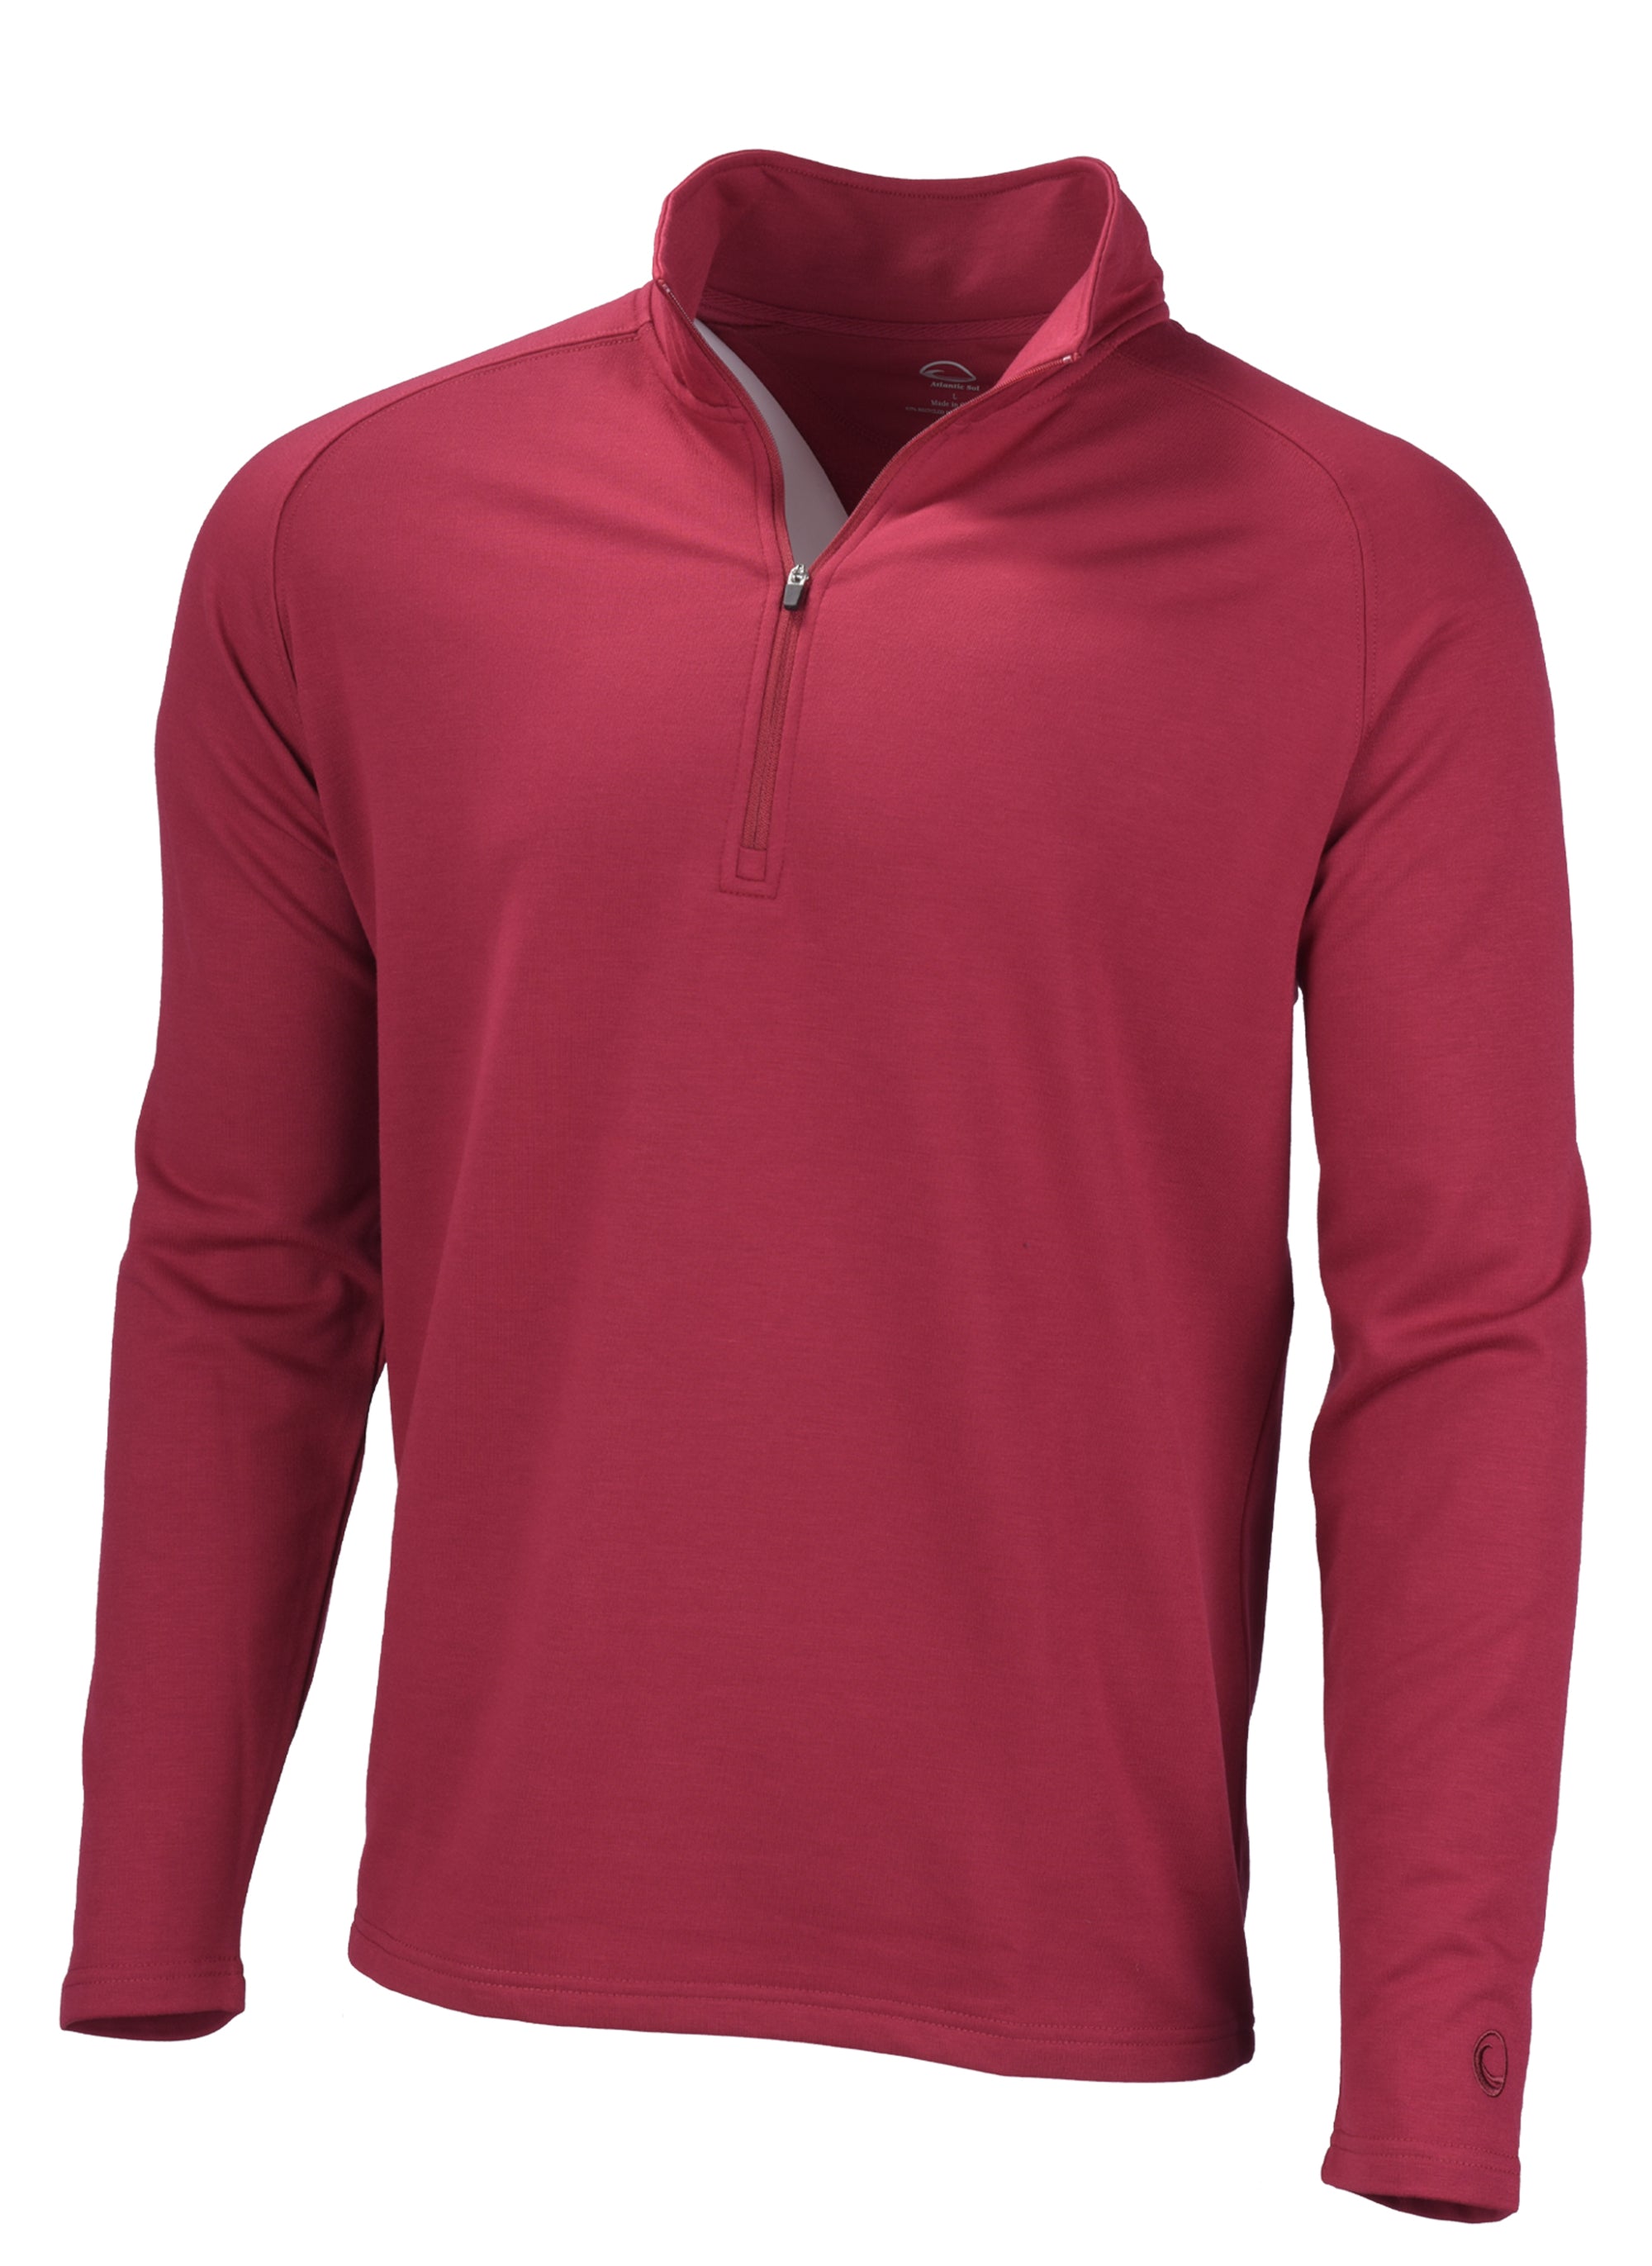 red pullover, best pullover to wear to the beach, coastal clothing, vacation clothes, florida sweater